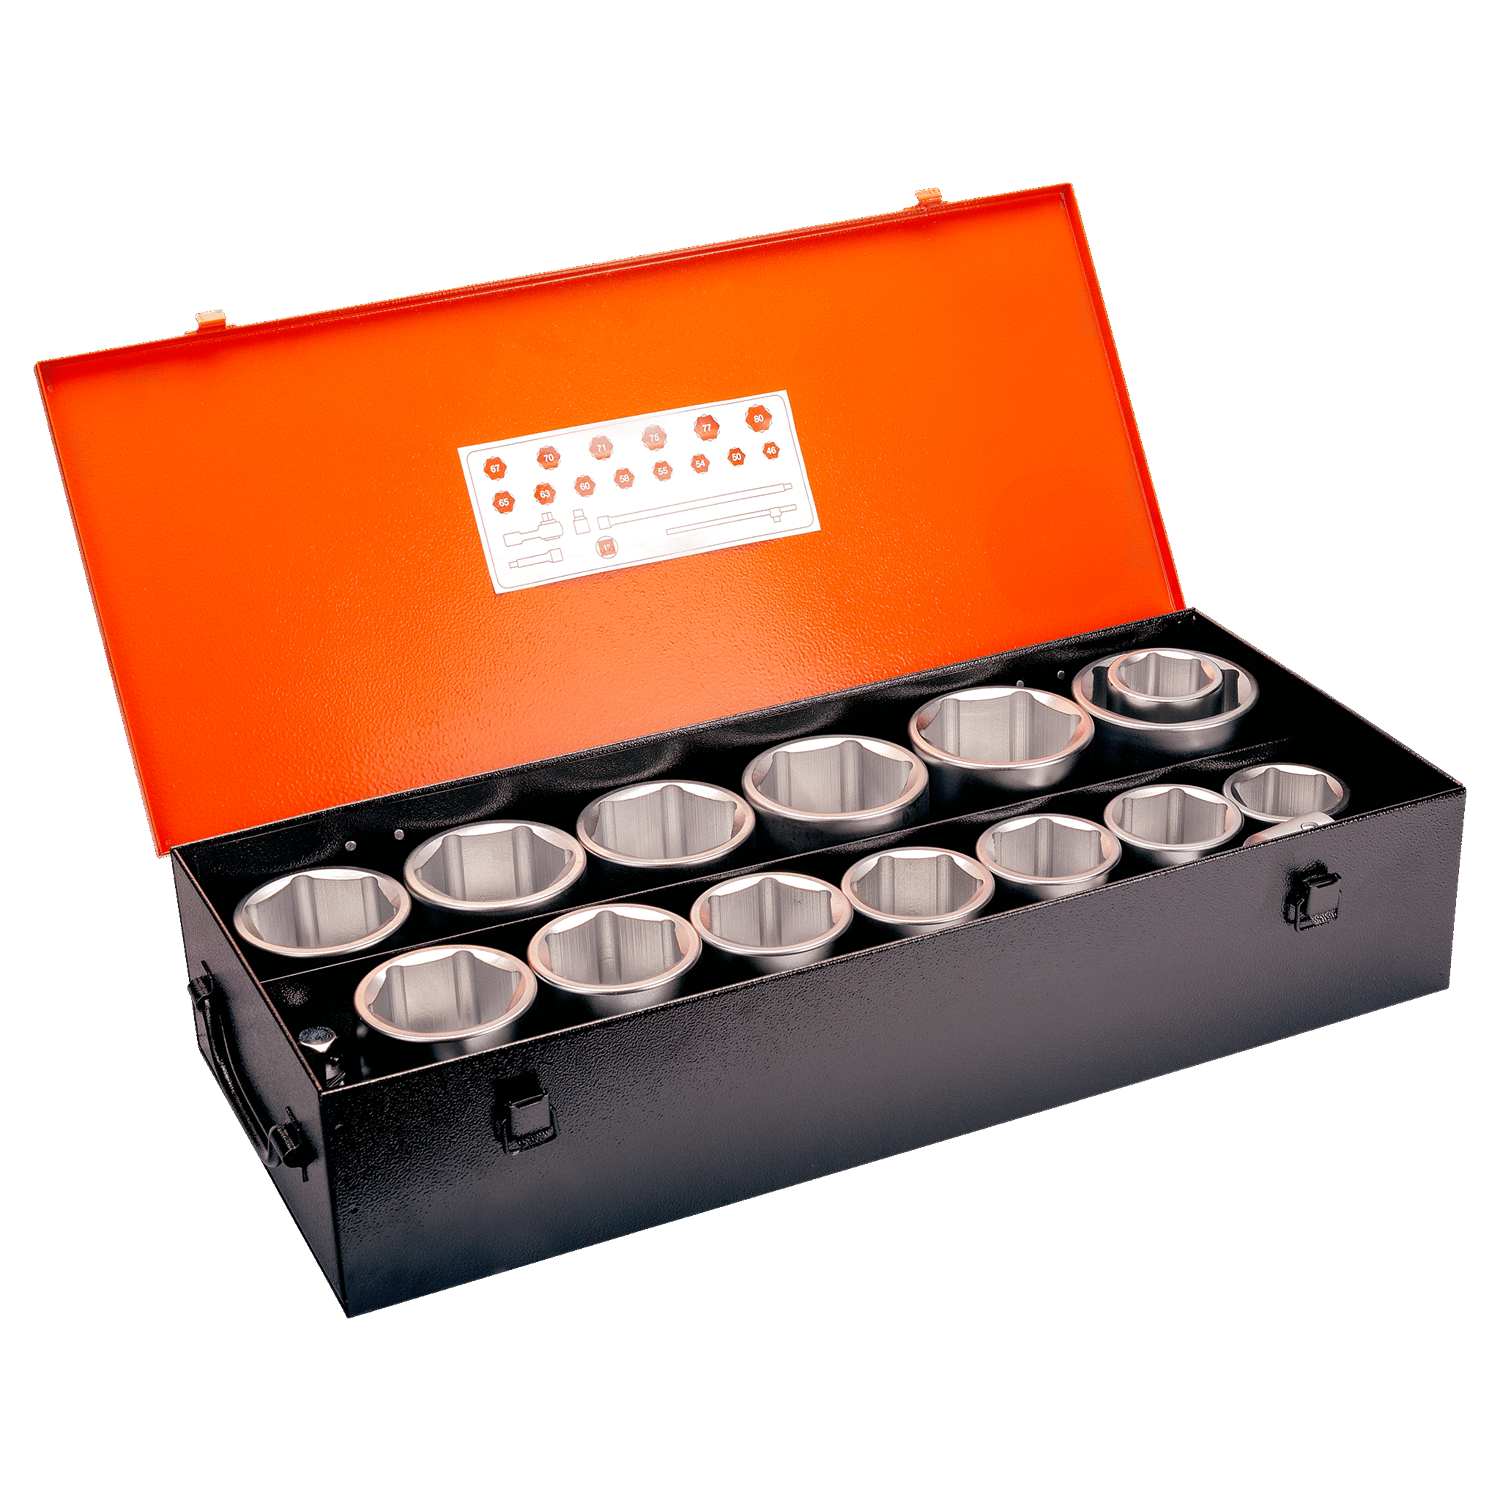 BAHCO 9540MBL 1" Square Drive Socket Set Metric Hex Profile - Premium Socket Set from BAHCO - Shop now at Yew Aik.